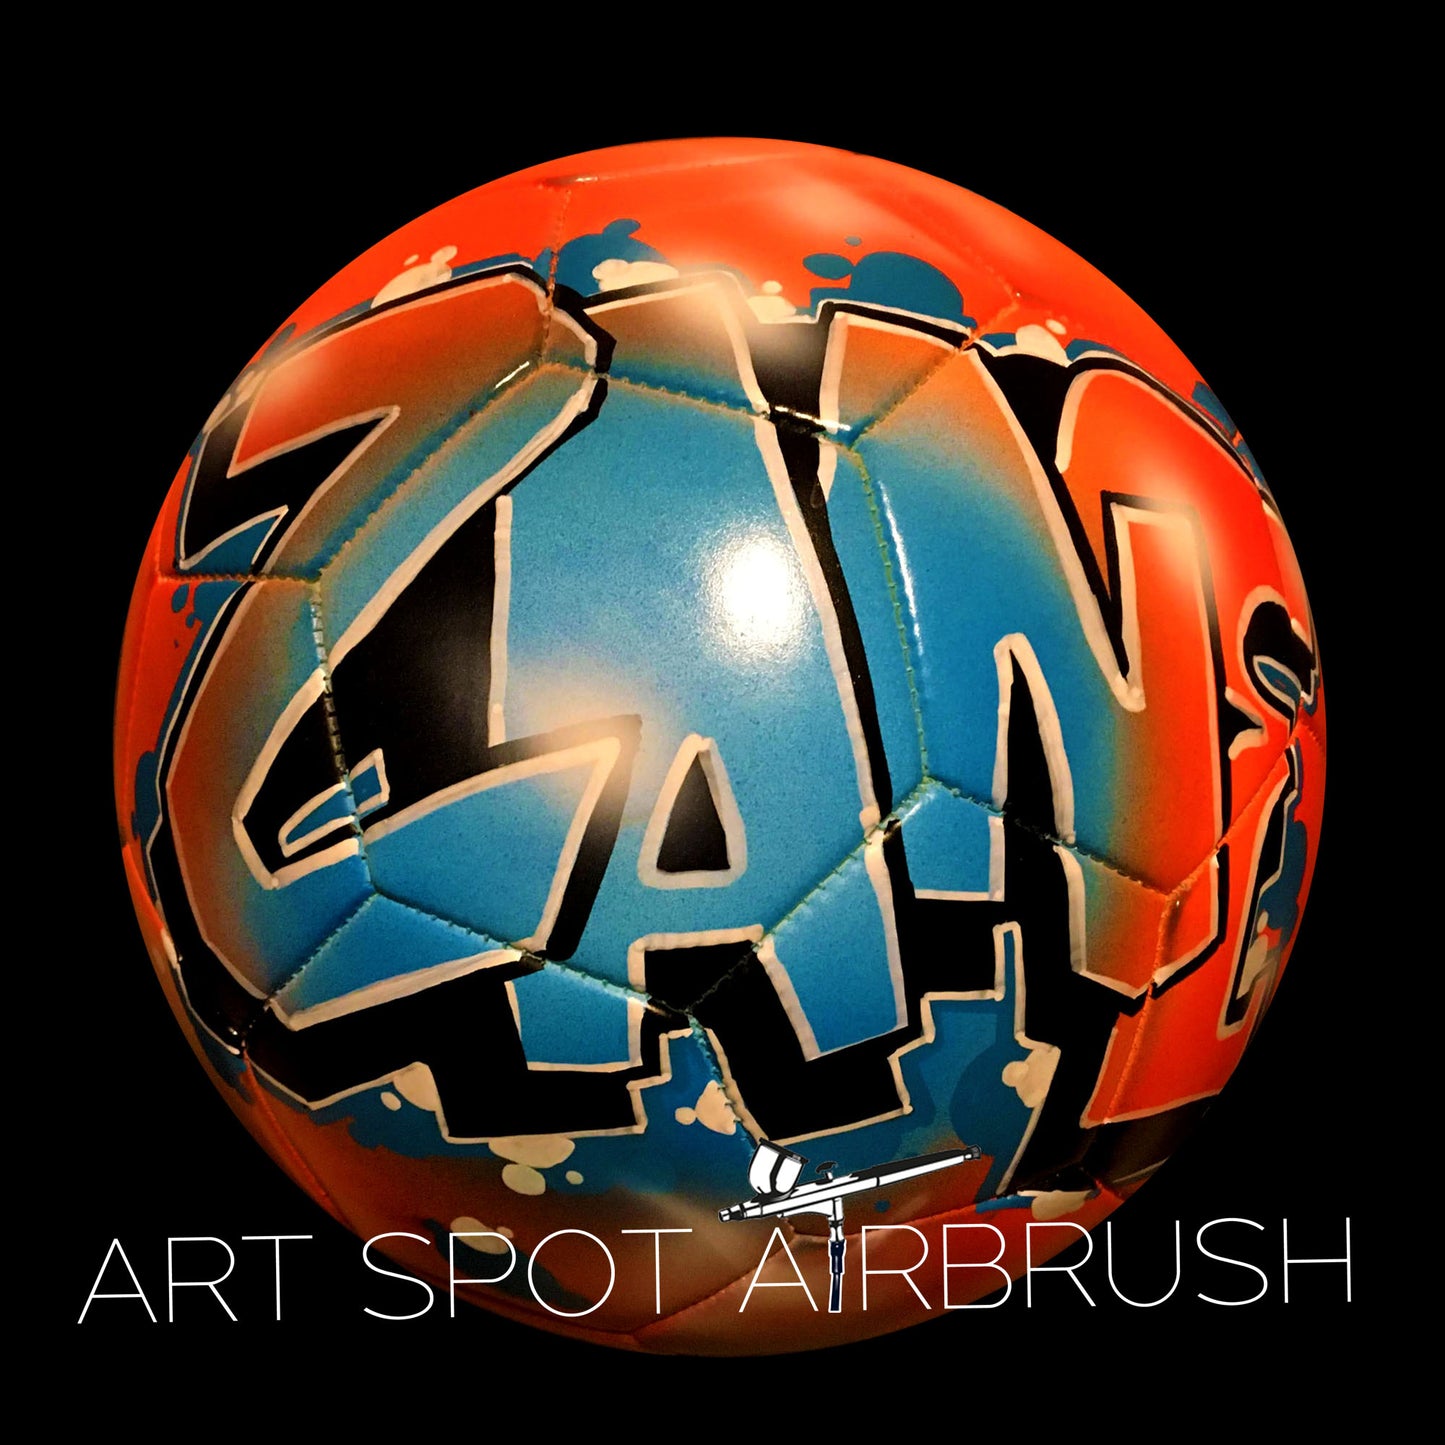 Personalized Soccer Ball with Name in Graffiti